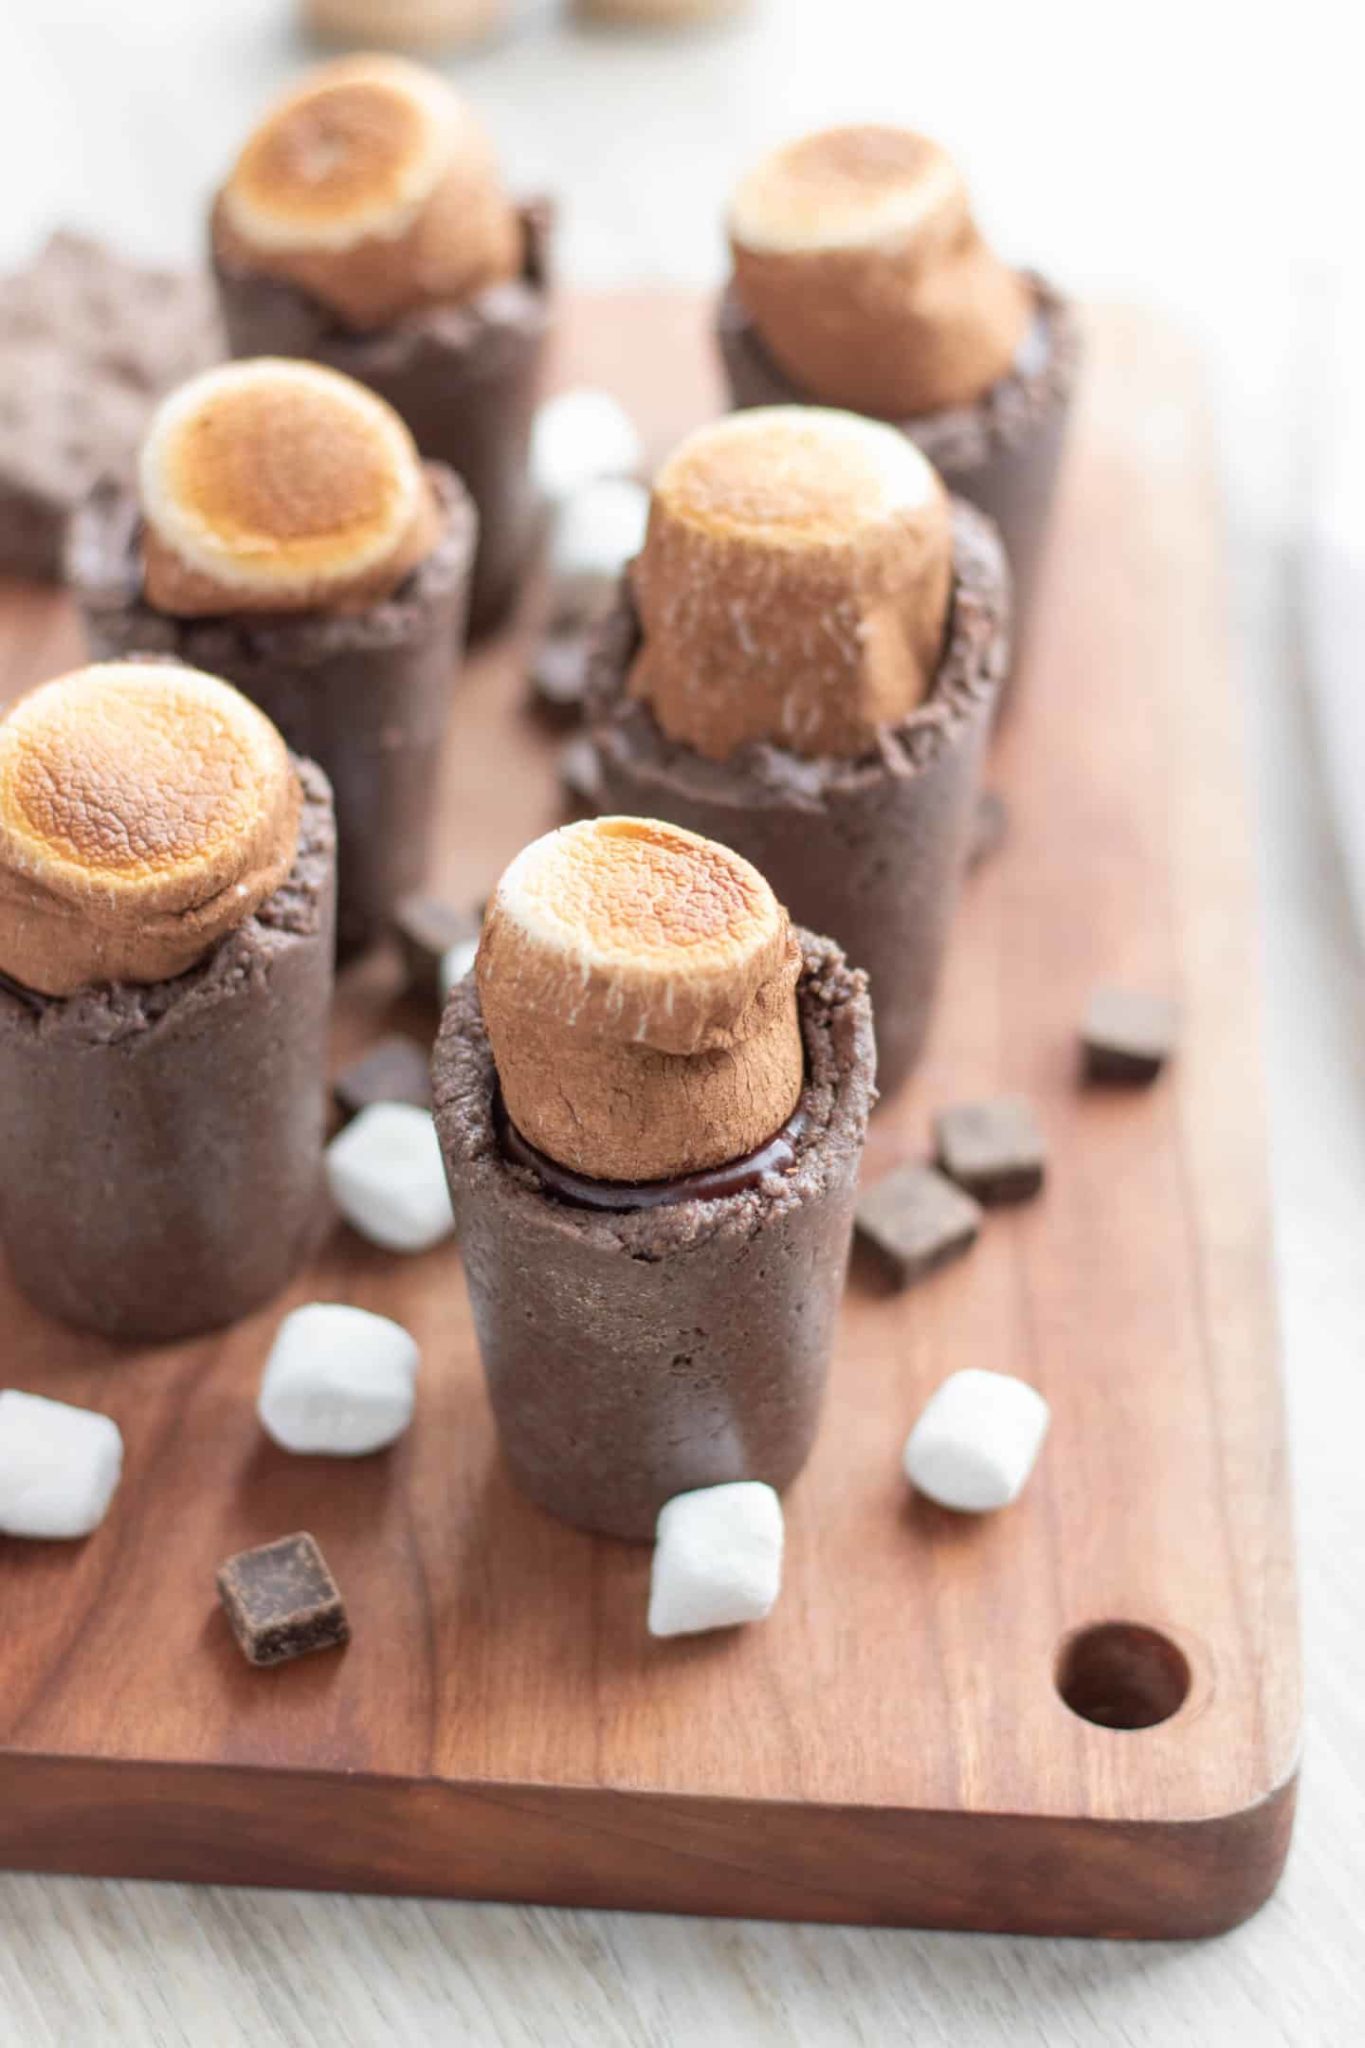 S'mores Shots in Chocolate Glasses